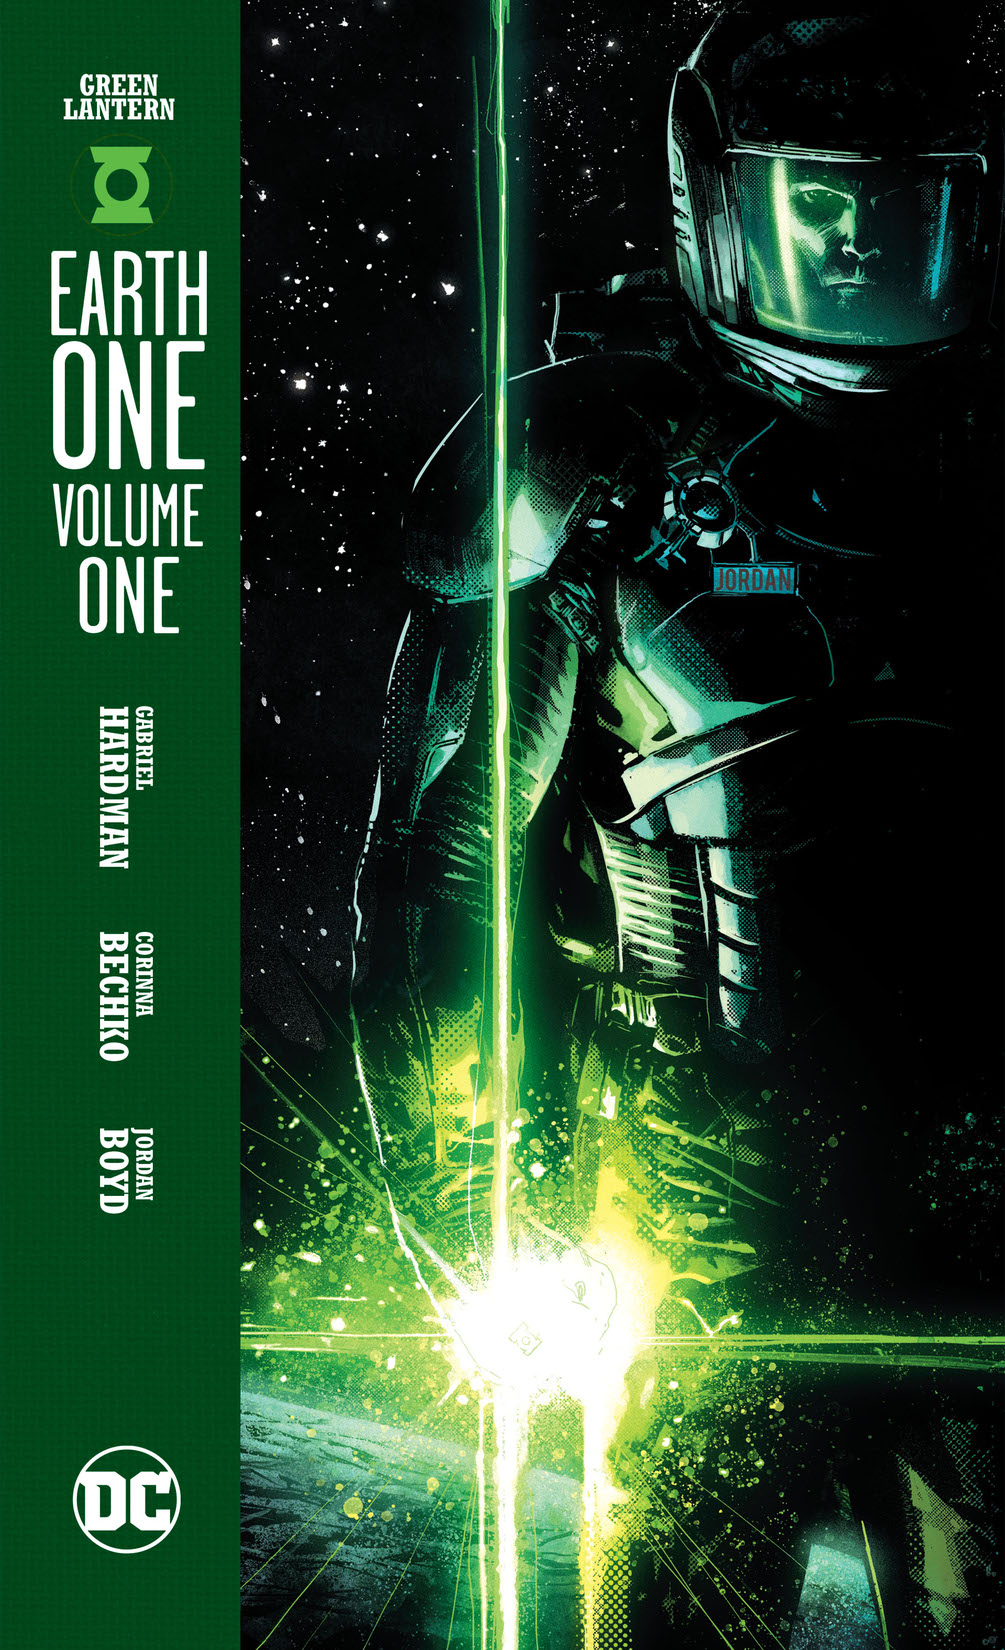 Green Lantern: Earth One Vol. 1 preview images